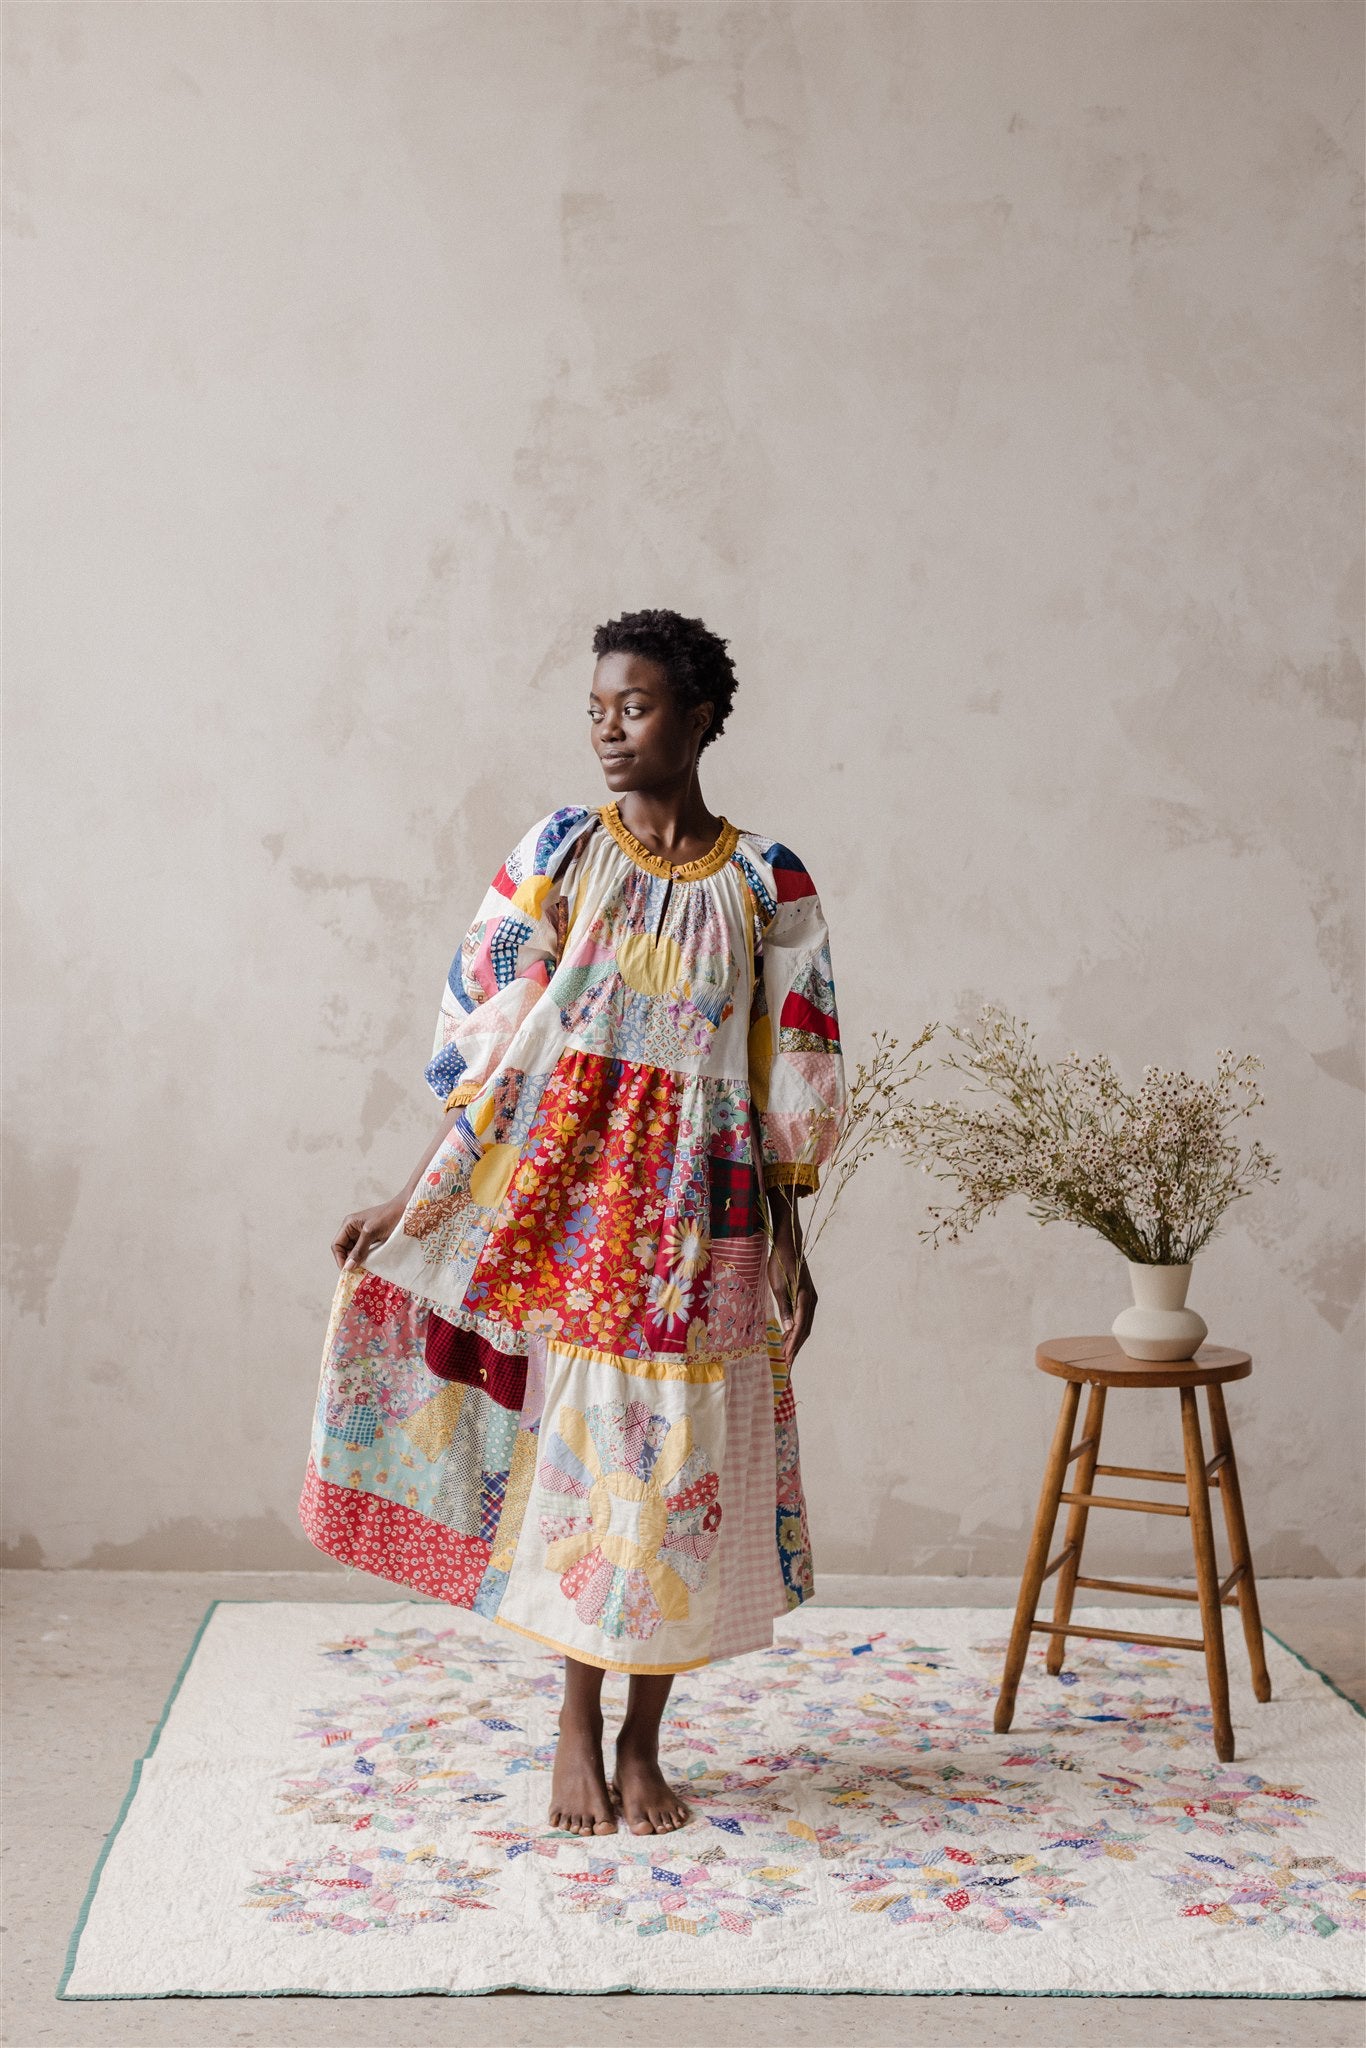 The Heirloom Patchwork Dress